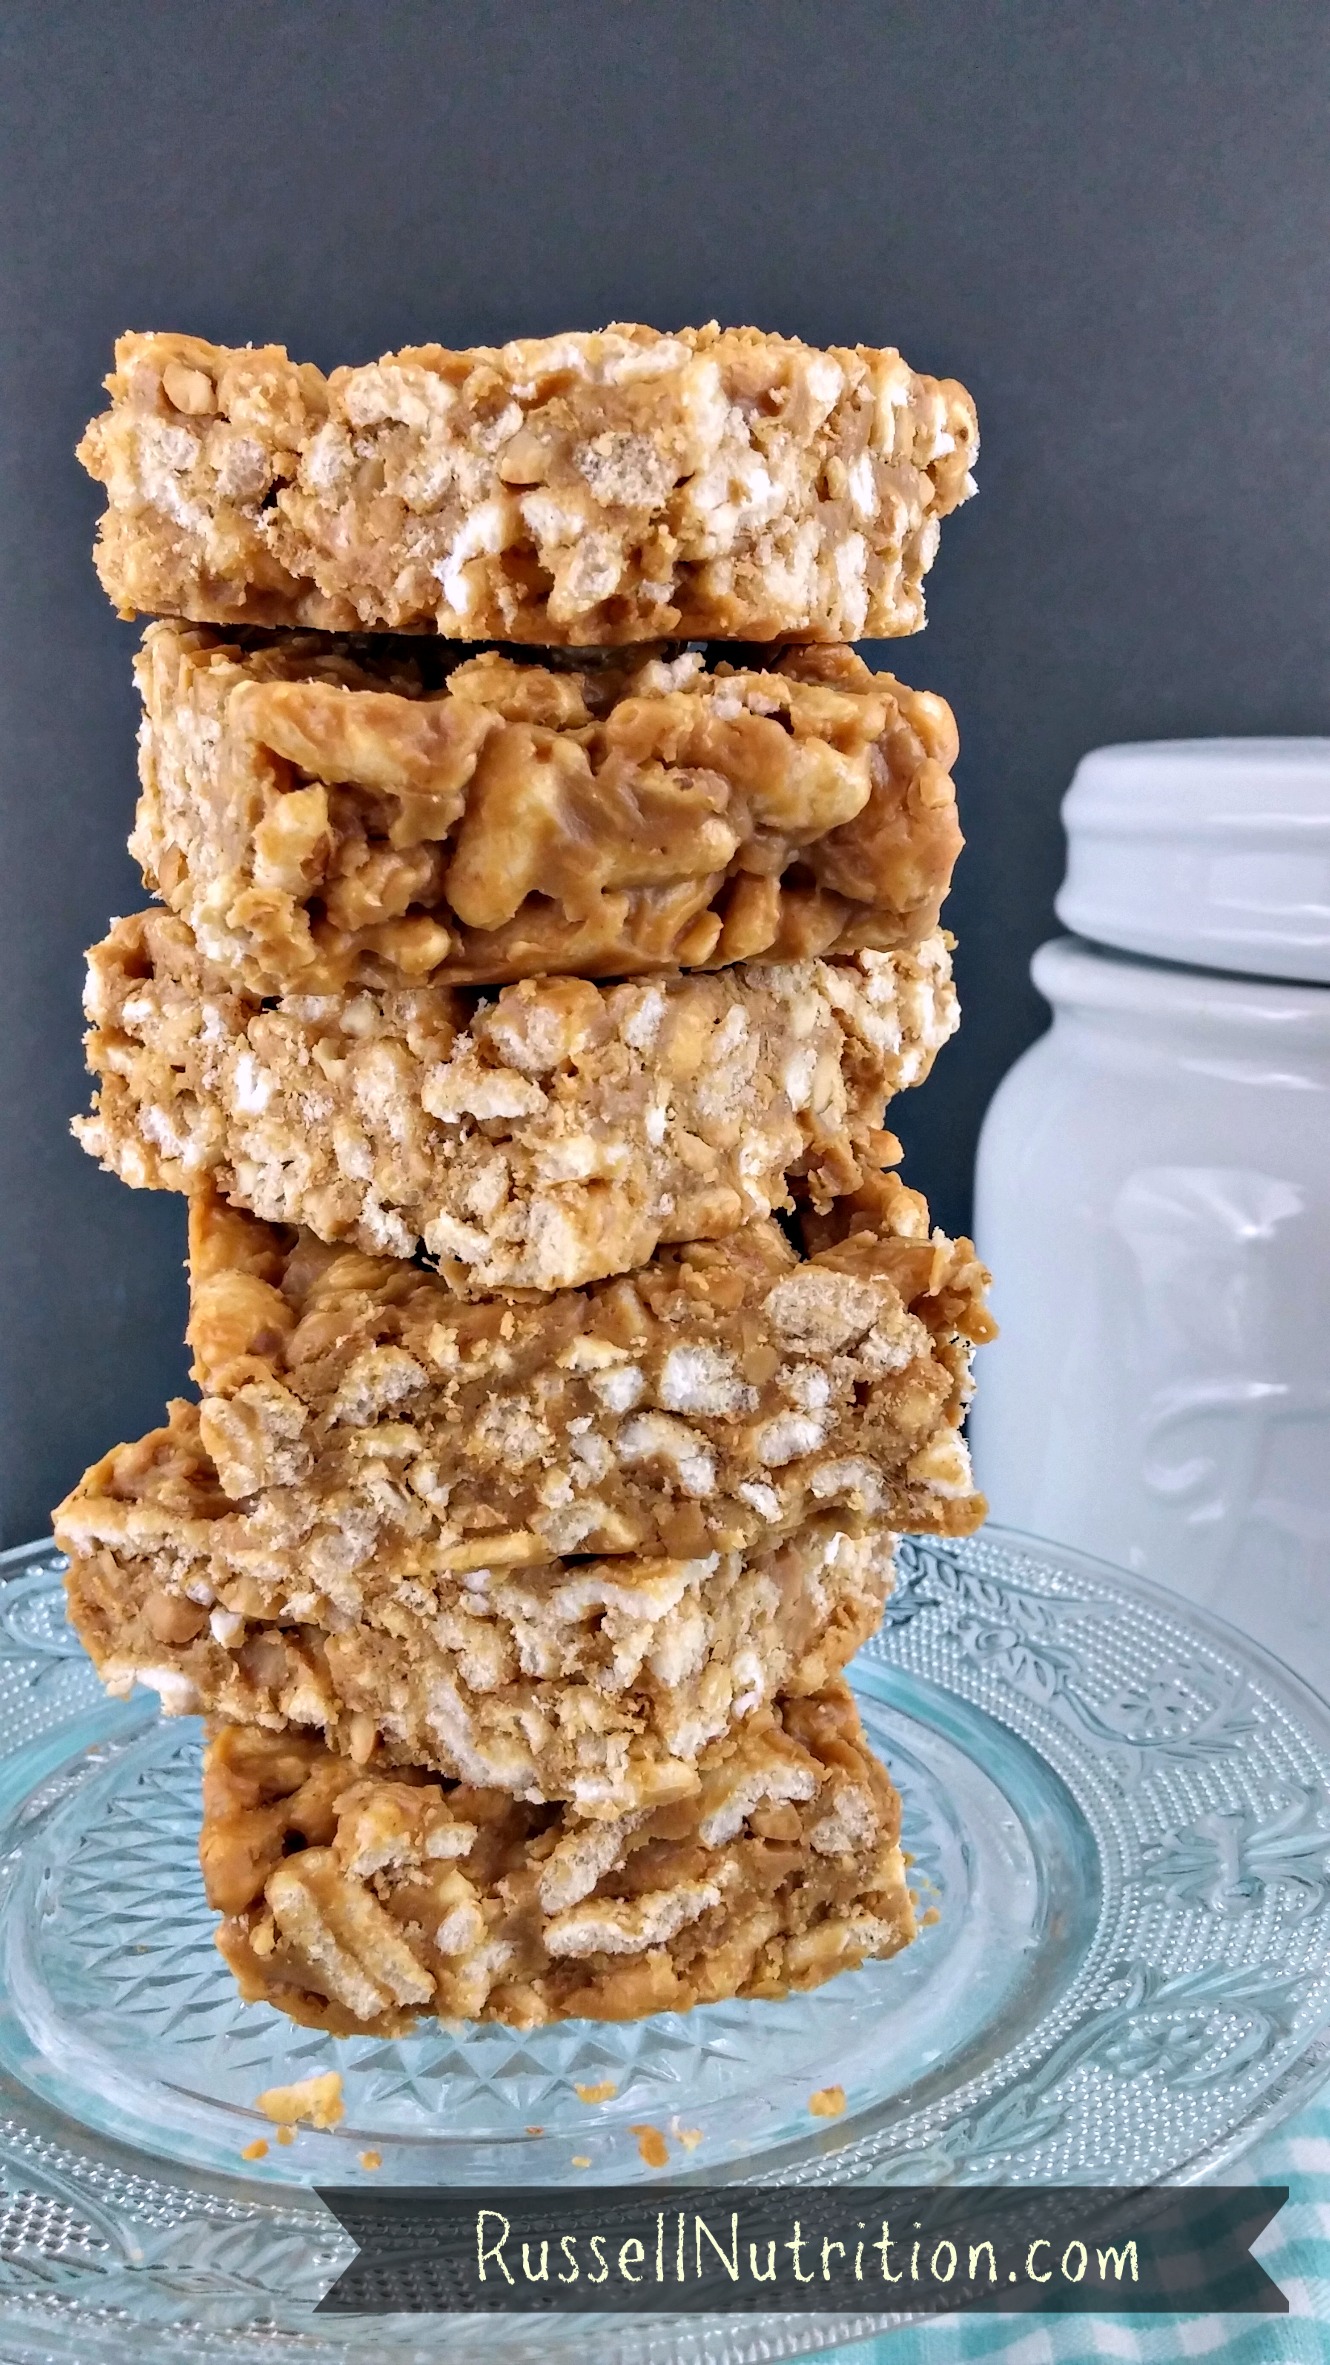 Cereal Bars (LEAP-Friendly)